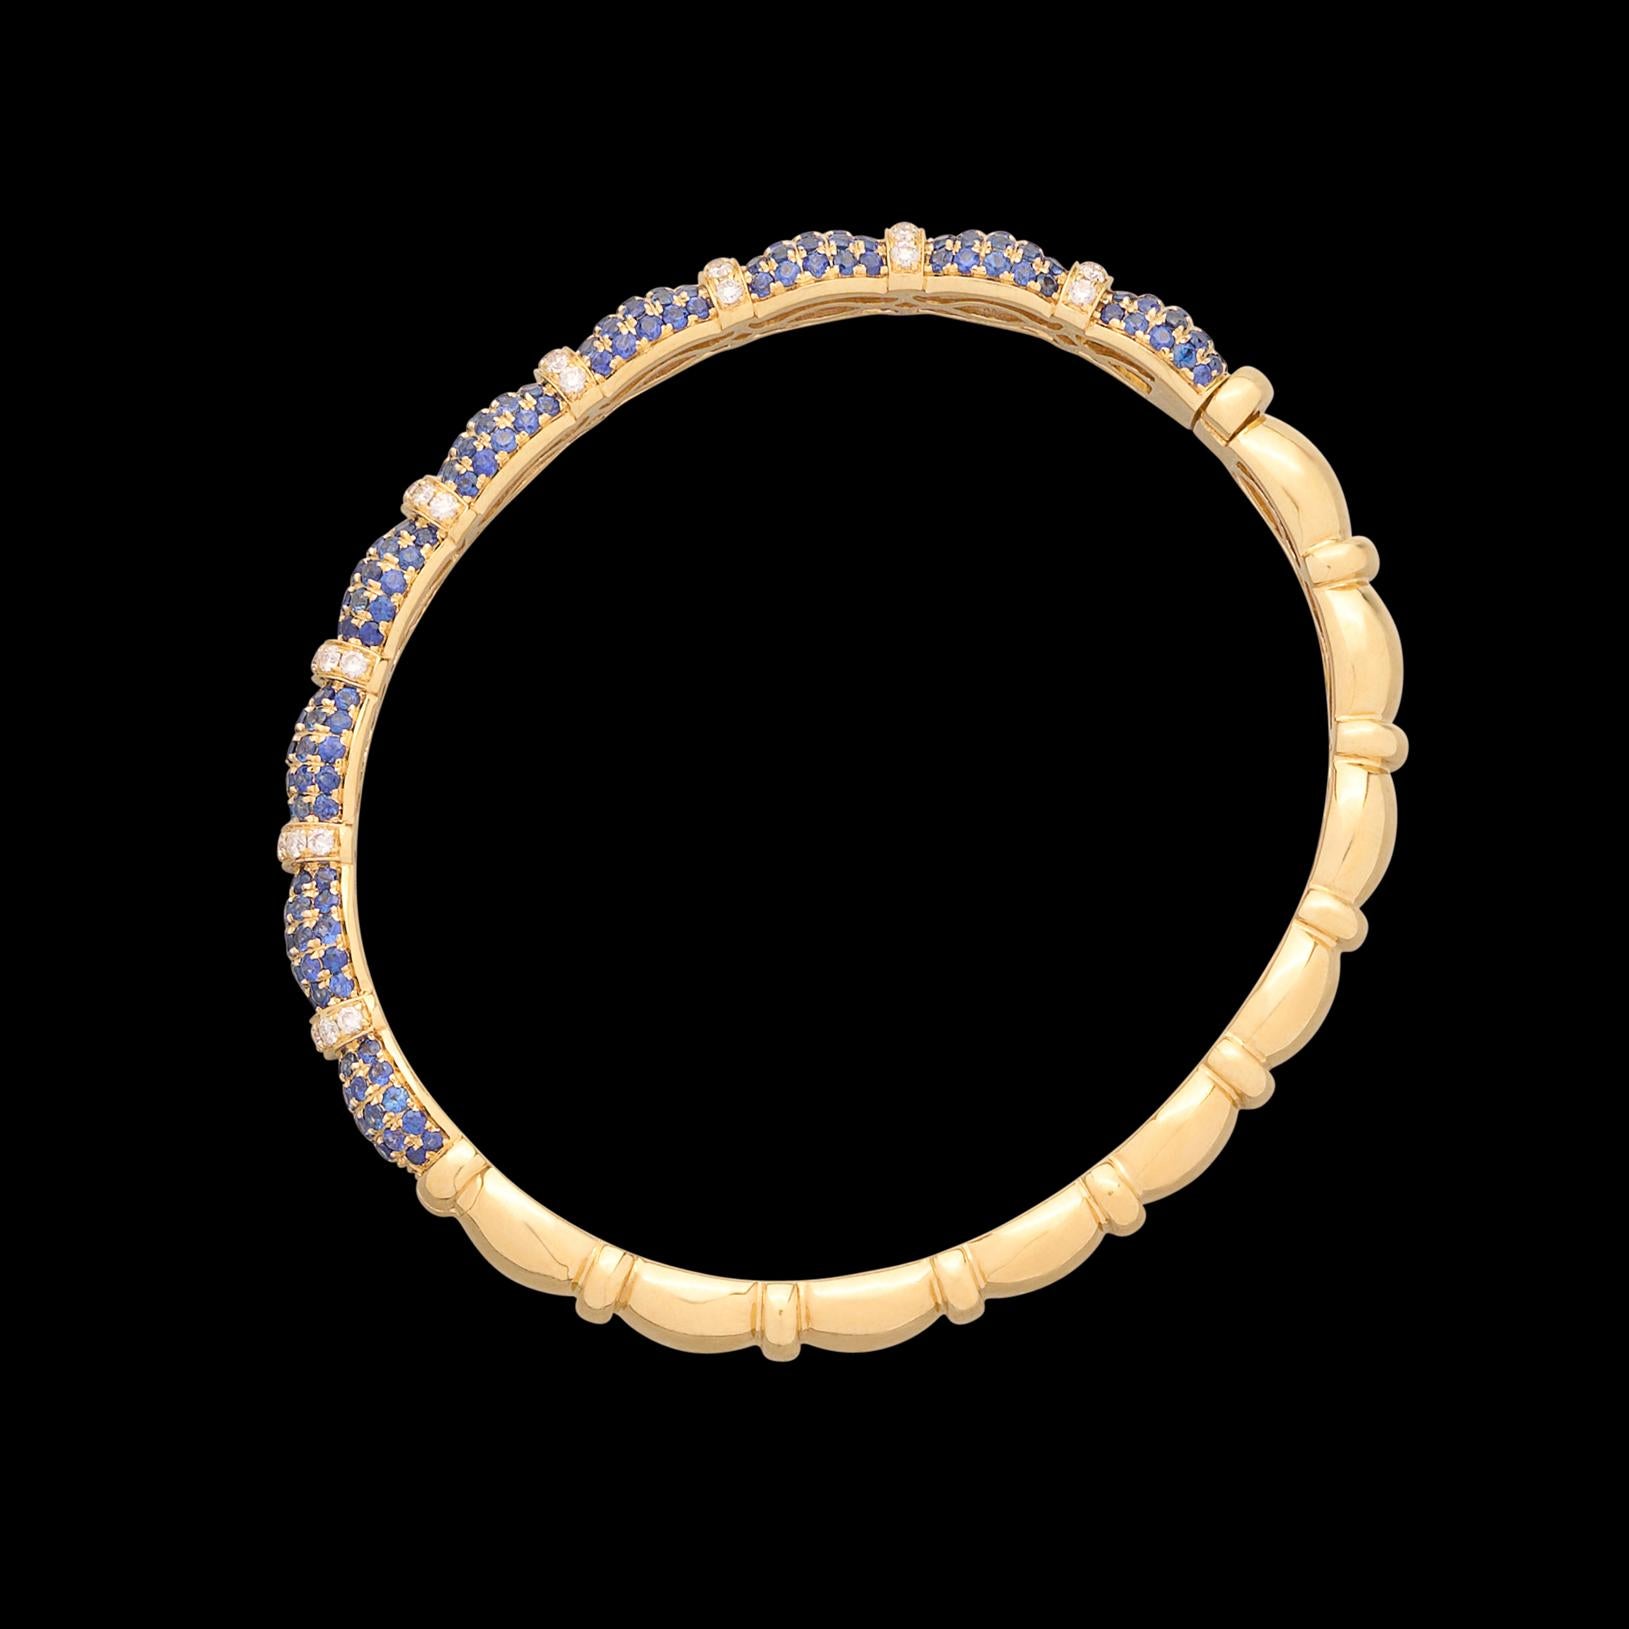 18kt Yellow Gold Diamond & Sapphire Bangle Bracelet In Excellent Condition For Sale In San Francisco, CA